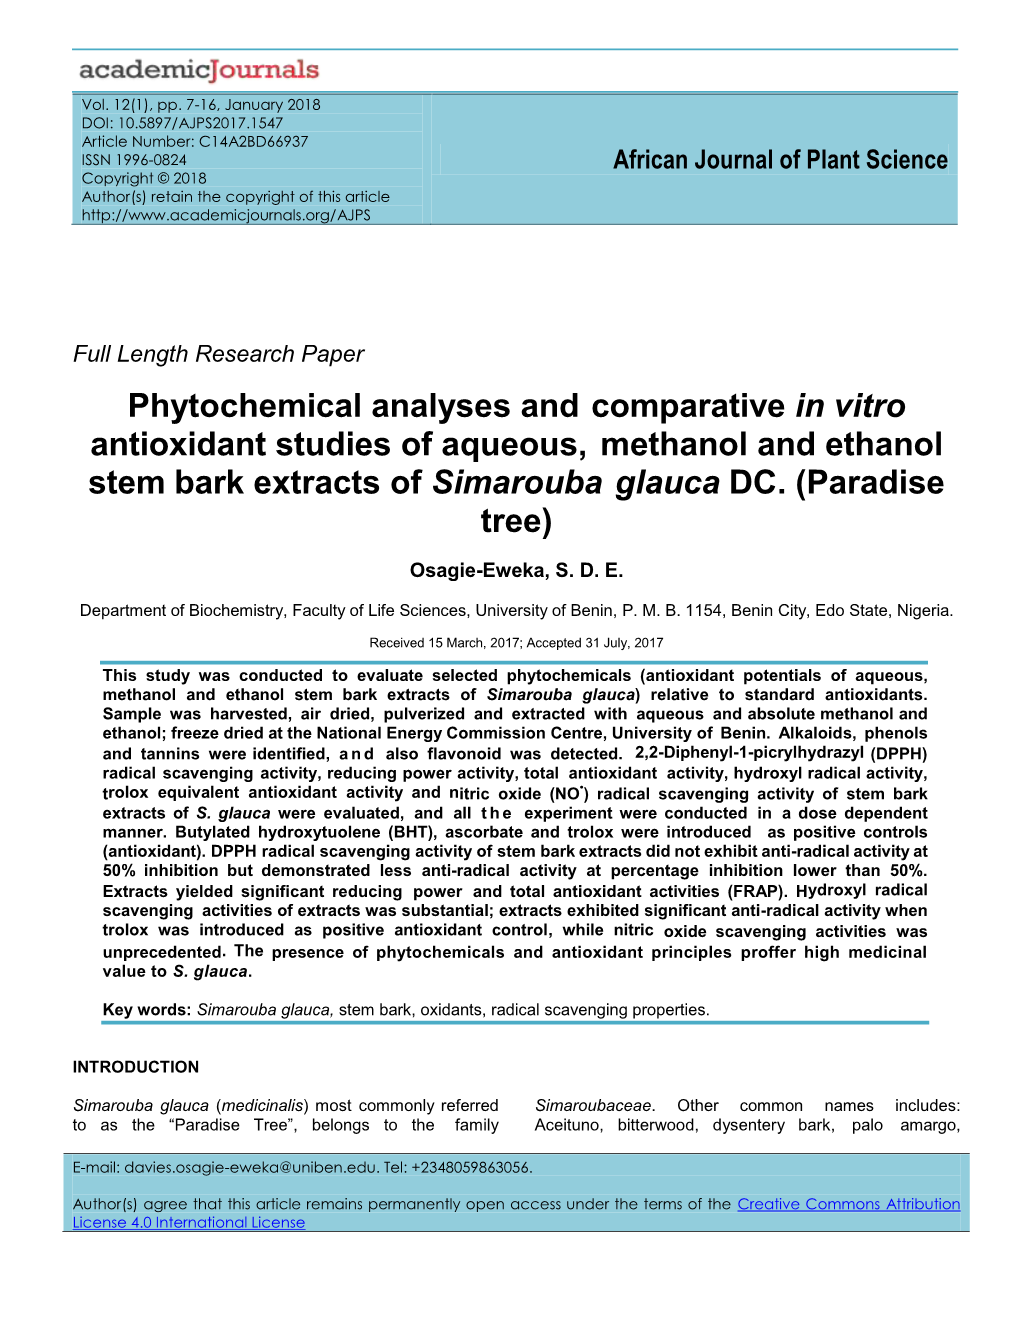 Phytochemical Analyses and Comparative in Vitro Antioxidant Studies of Aqueous, Methanol and Ethanol Stem Bark Extracts of Simarouba Glauca DC